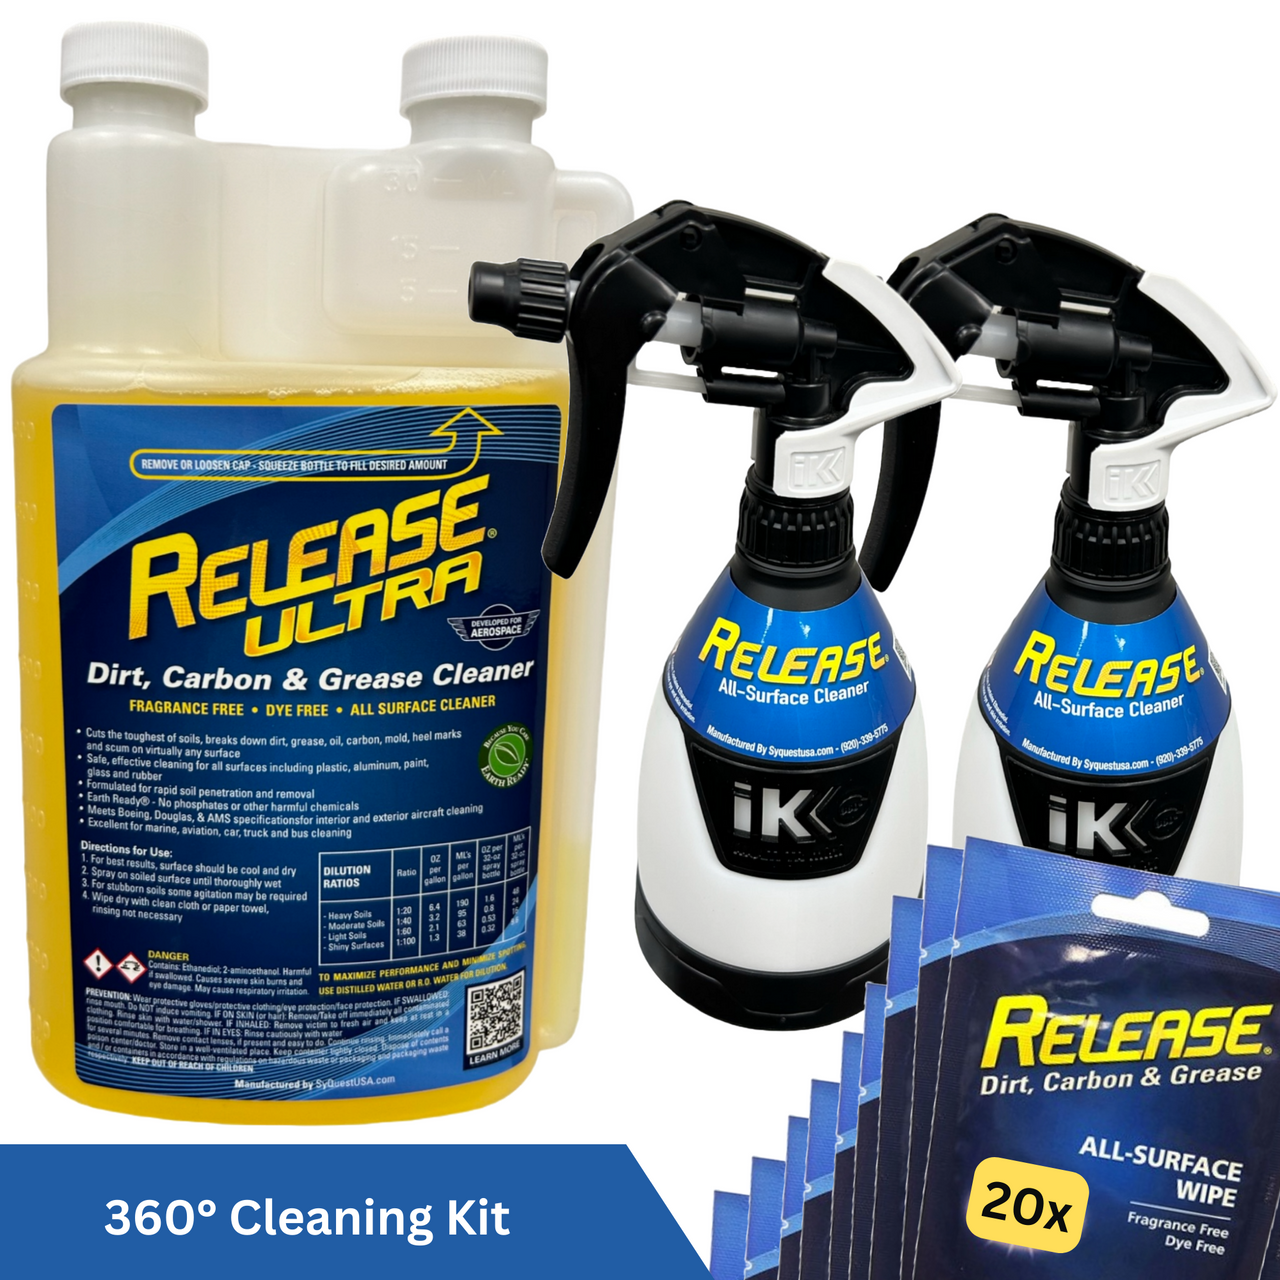 Use Better Cleaning Tools for Better Results